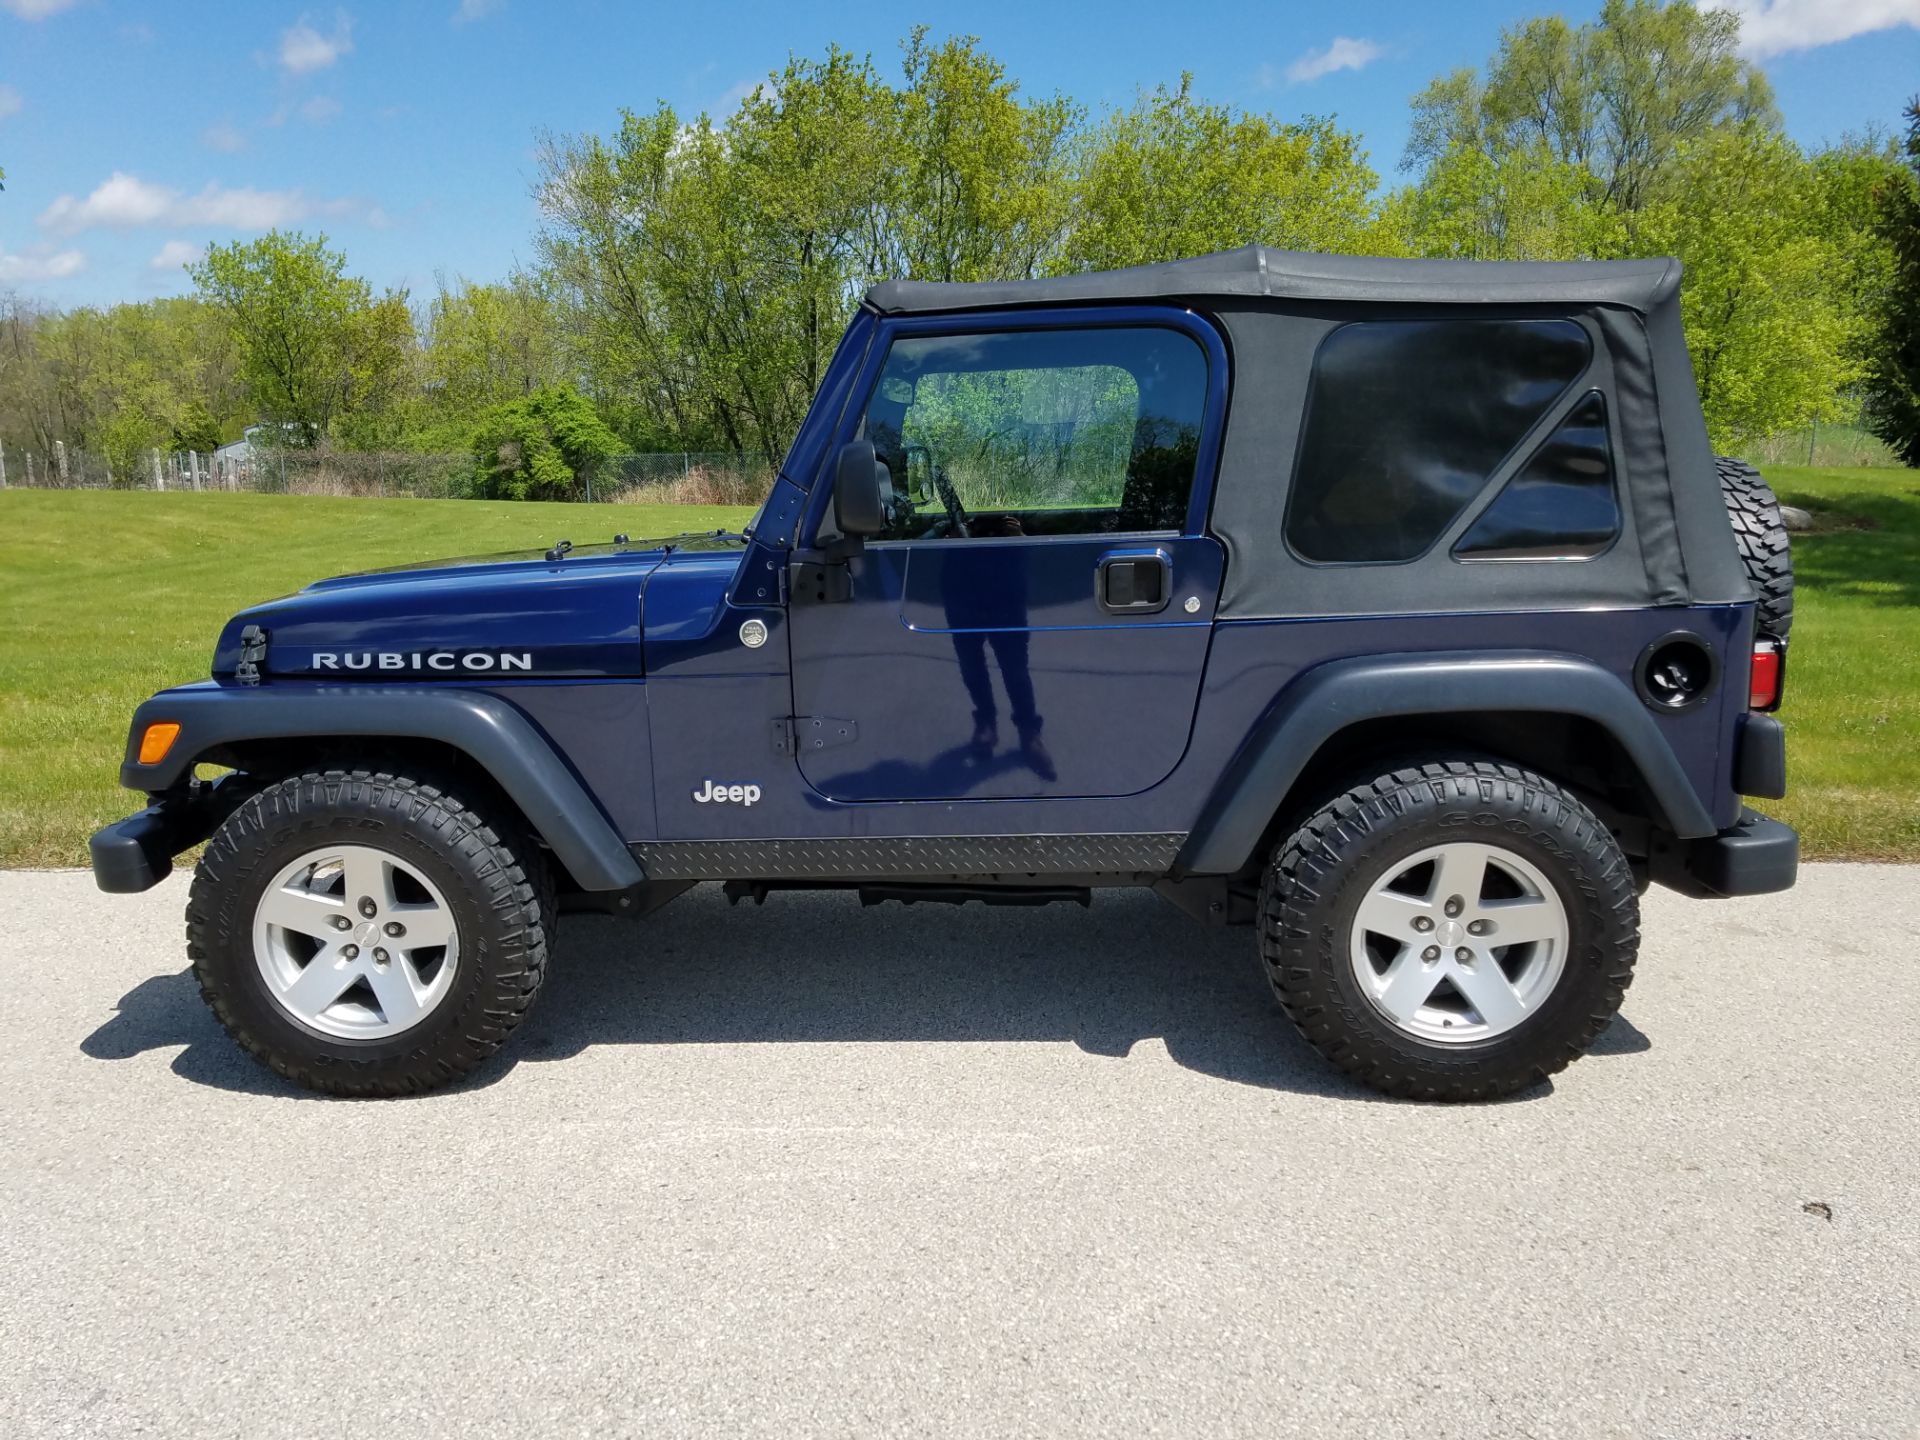 Used 2006 Jeep® Wrangler Rubicon | Automobile in Big Bend WI | 4400 Midnight  Blue